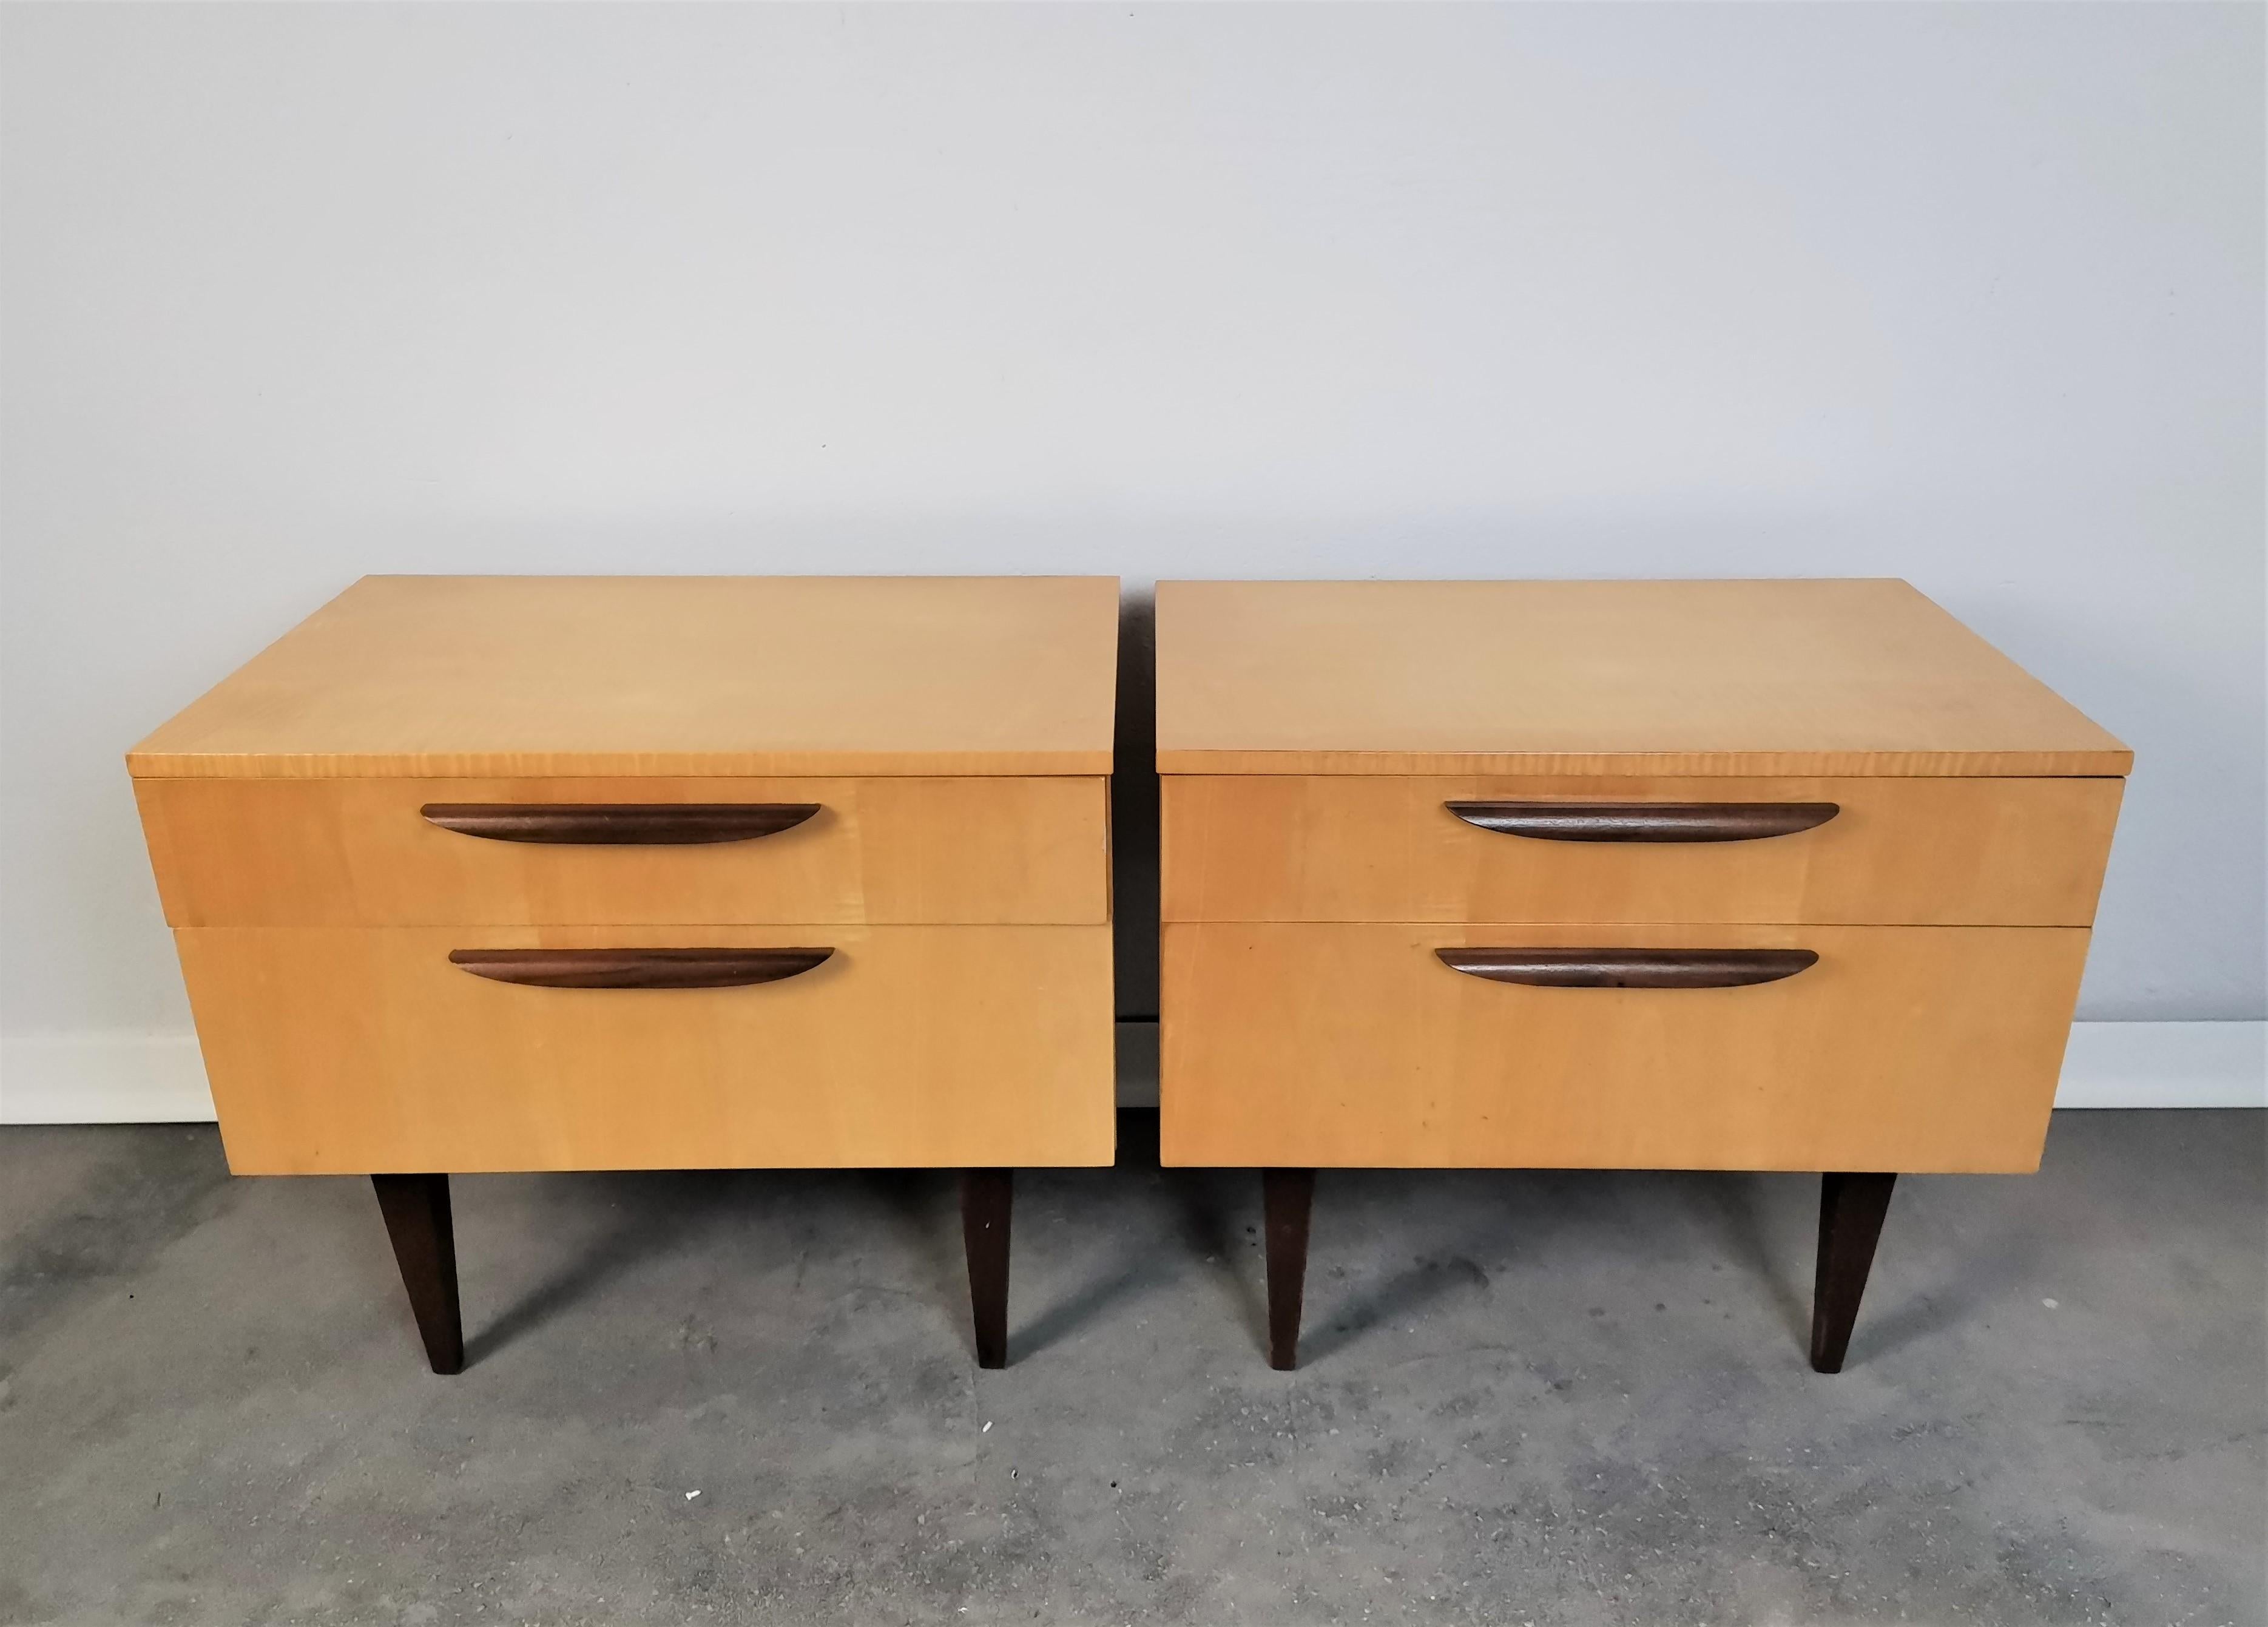 Pair of nightstands/bedside tables.
Production: Meblo, Slovenia/Yugoslavia.
Period: 1970s.
Materials: wood, plywood, furnished.
Condition: very good original vintage condition.
Style: mid-century, classic italian.